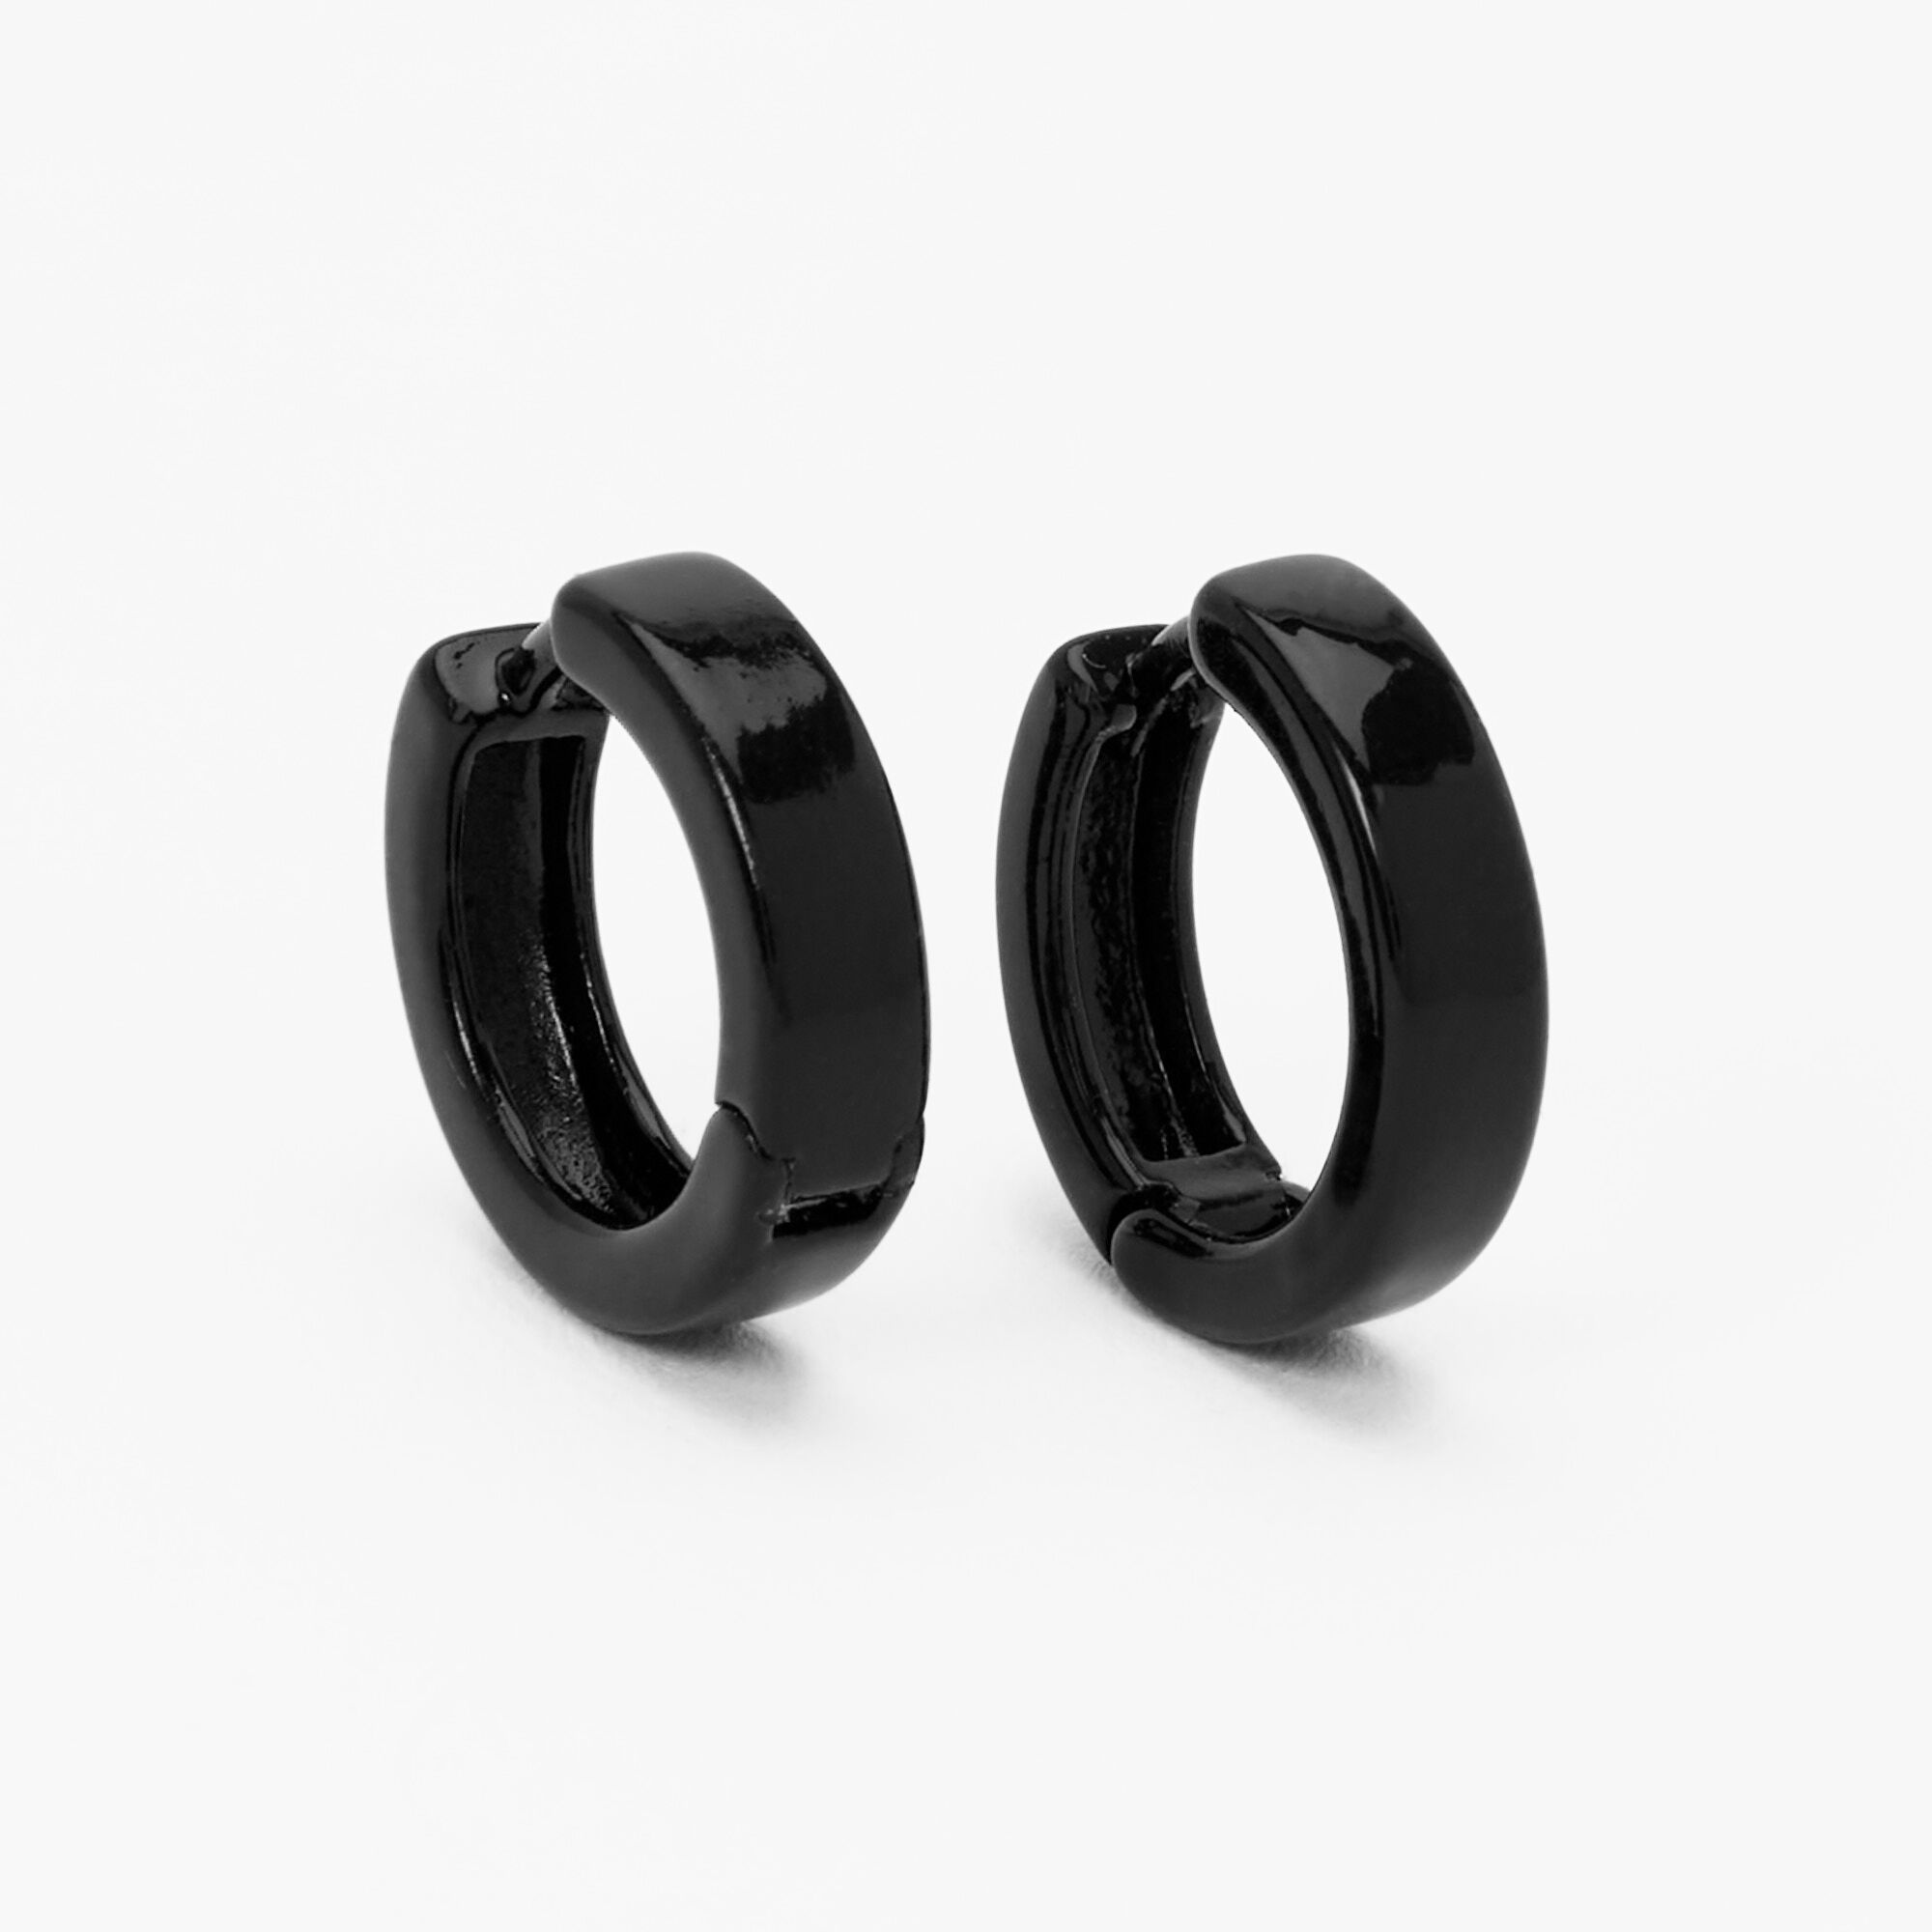 Stylish Black Hoops Earrings For Men's | B37-MAY-91 | Cilory.com